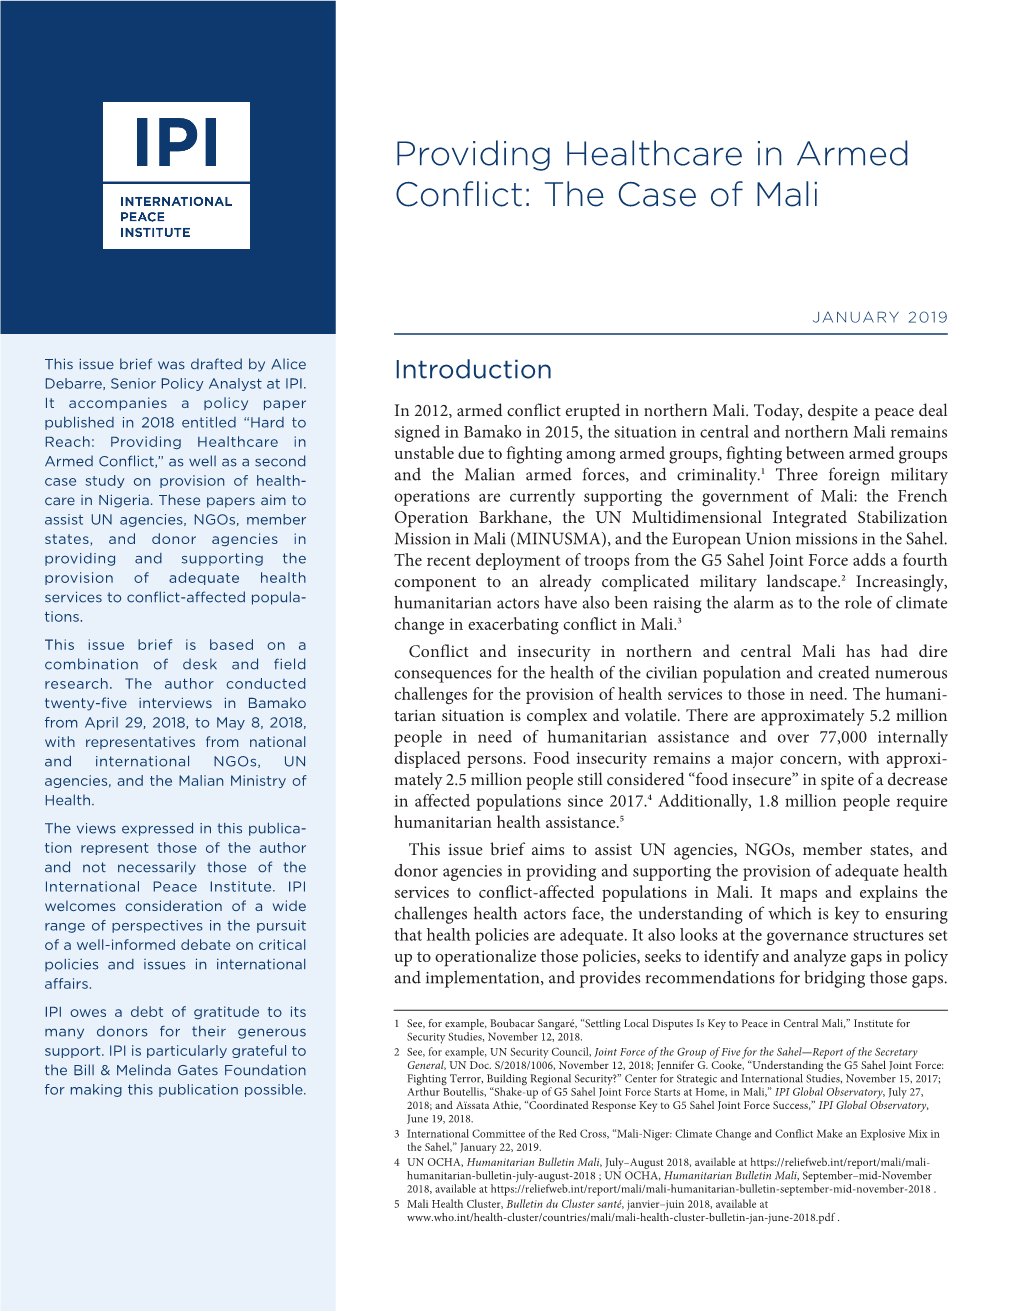 Providing Healthcare in Armed Conflict: the Case of Mali